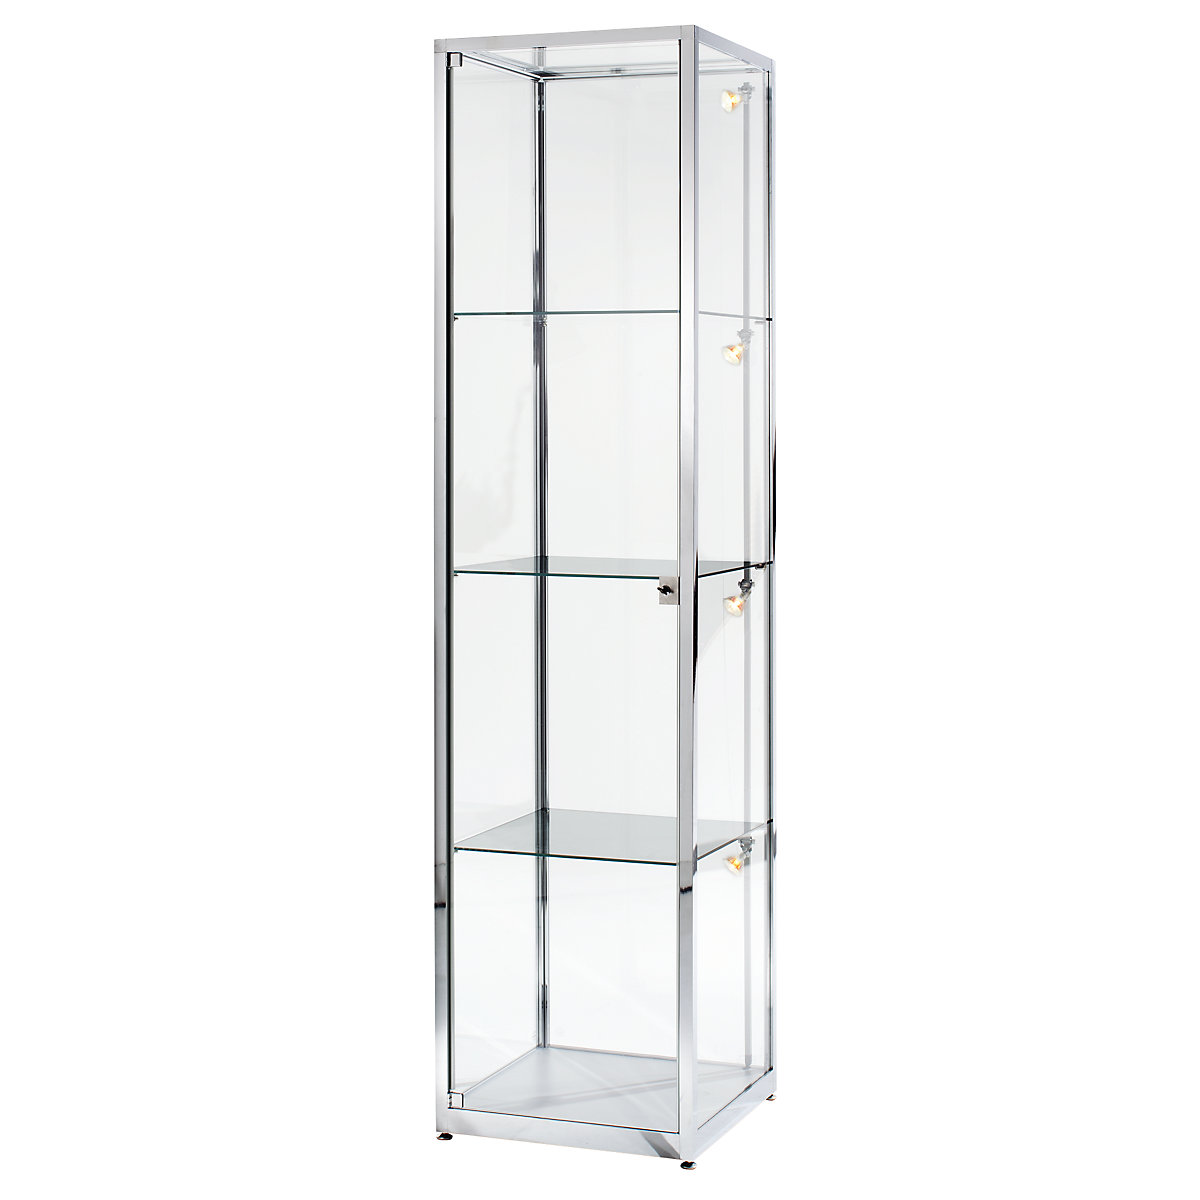 Tall glass cabinet, height 2000 mm, 1 hinged door, WxD 400 x 400 mm, stainless steel finish-3